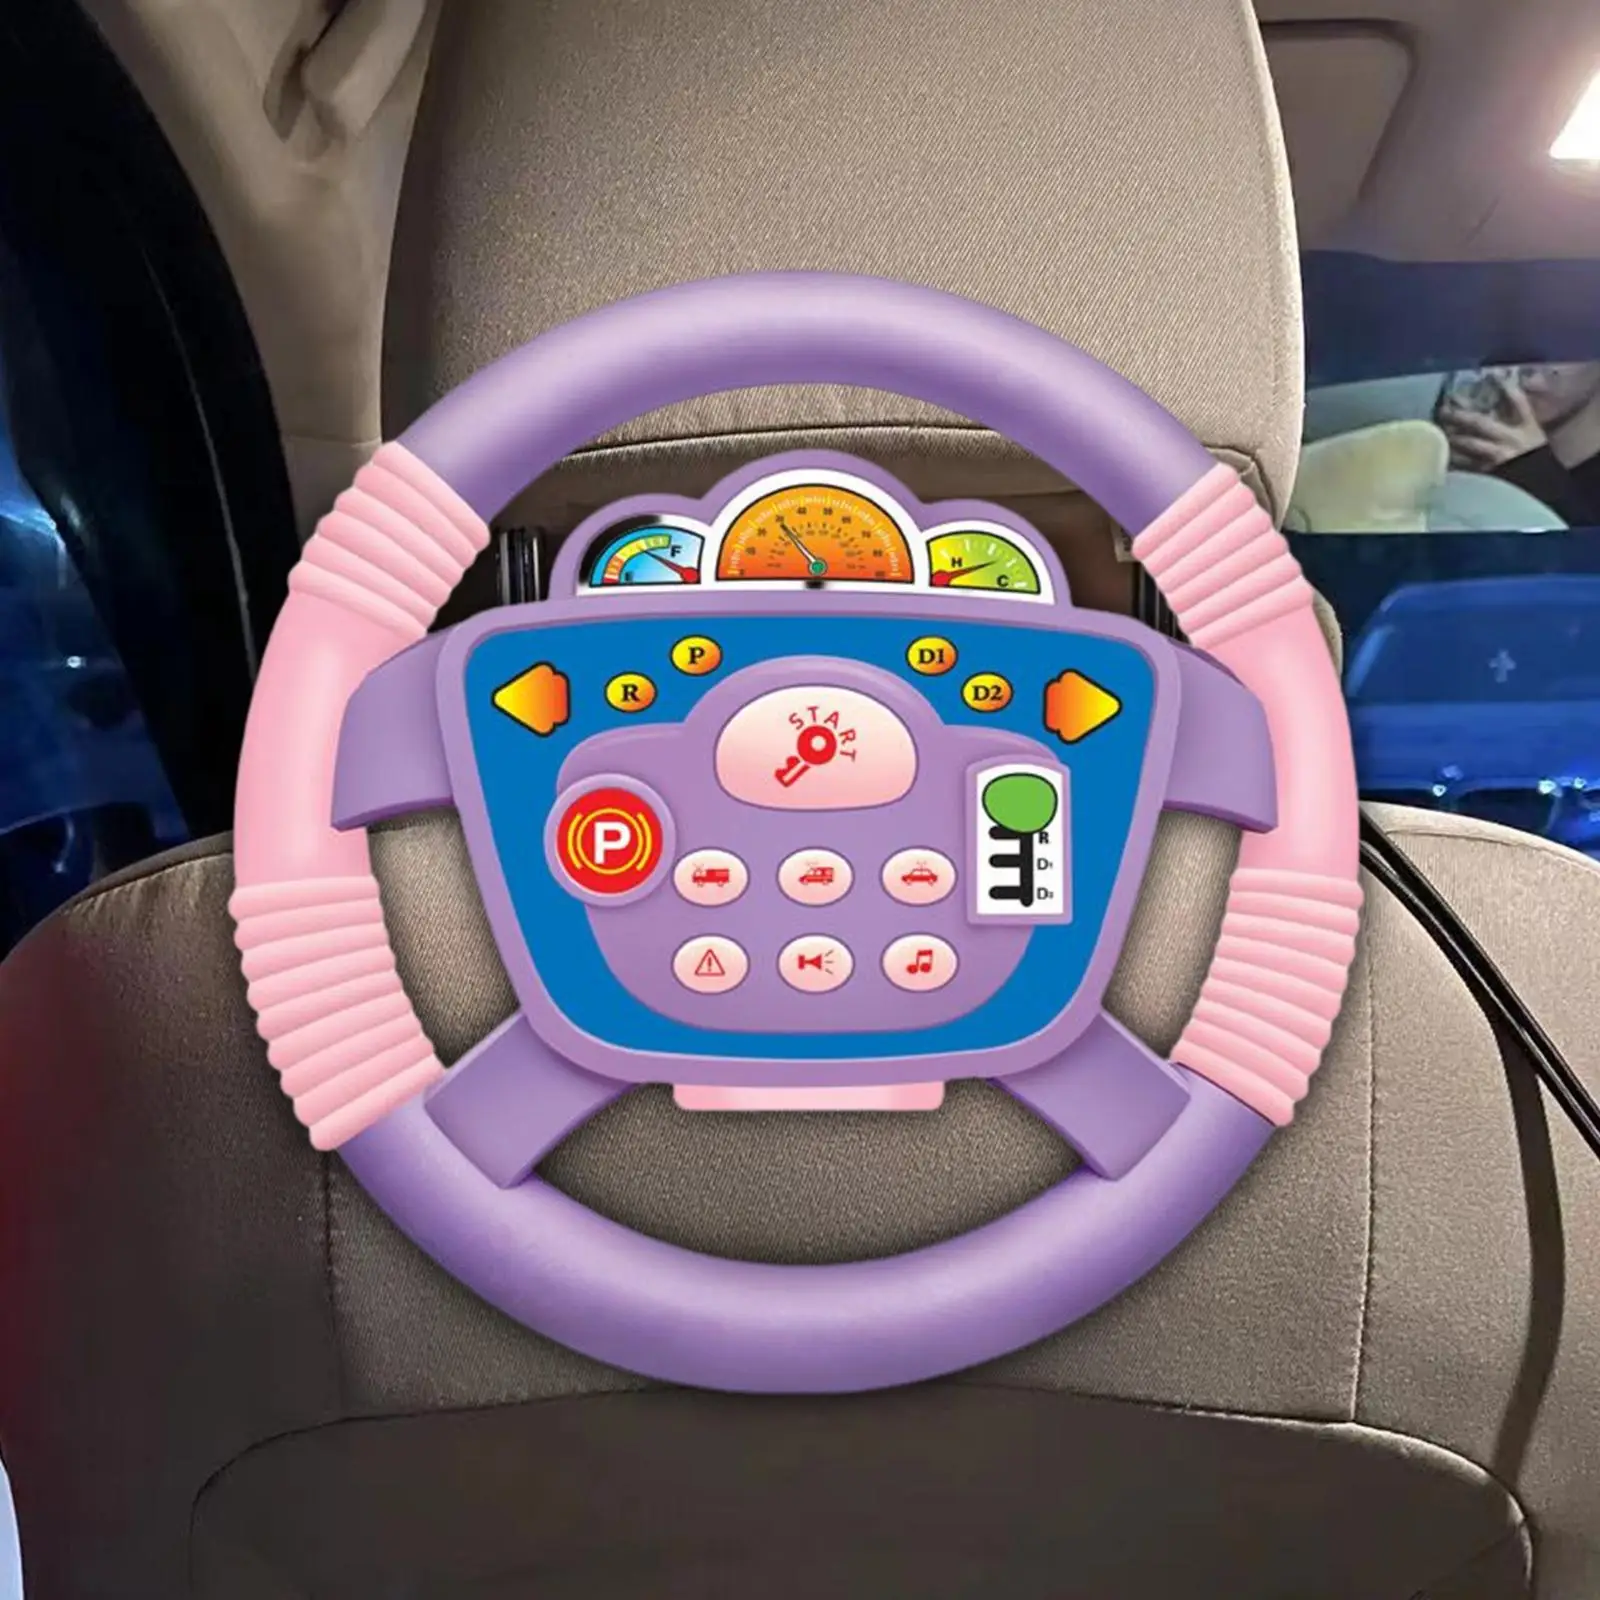 Driving Steering Wheel Toy Driving Controller with Music Pretend Driving Racing Game Funny Educational Learning Toy for Toddlers